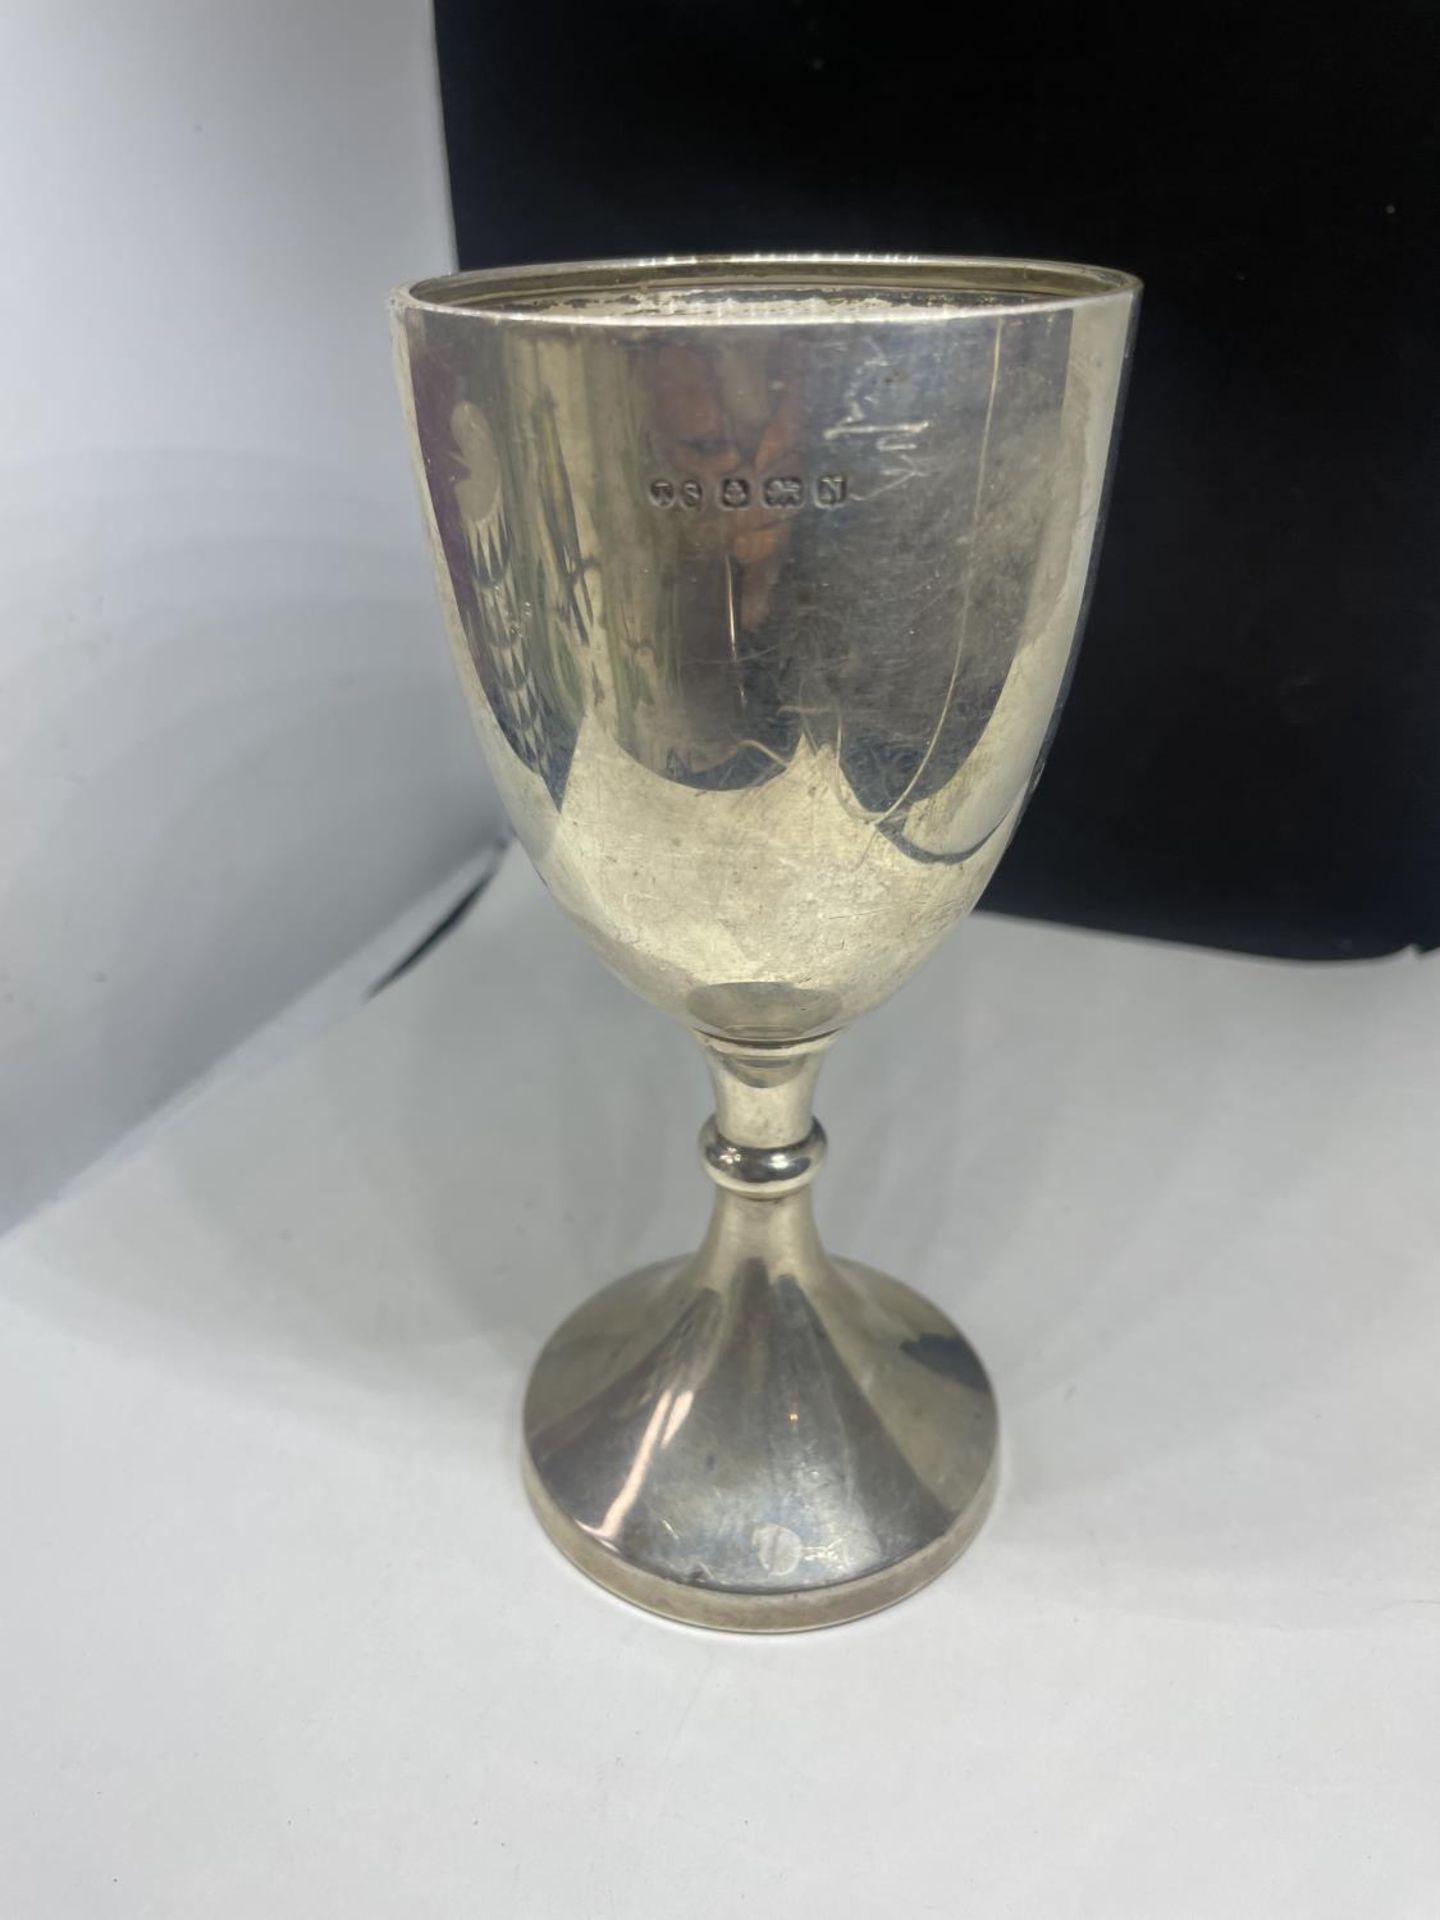 A HALLMARKED BIRMINGHAM SILVER GOBLET GROSS WEIGHT 104.7 GRAMS - Image 3 of 4